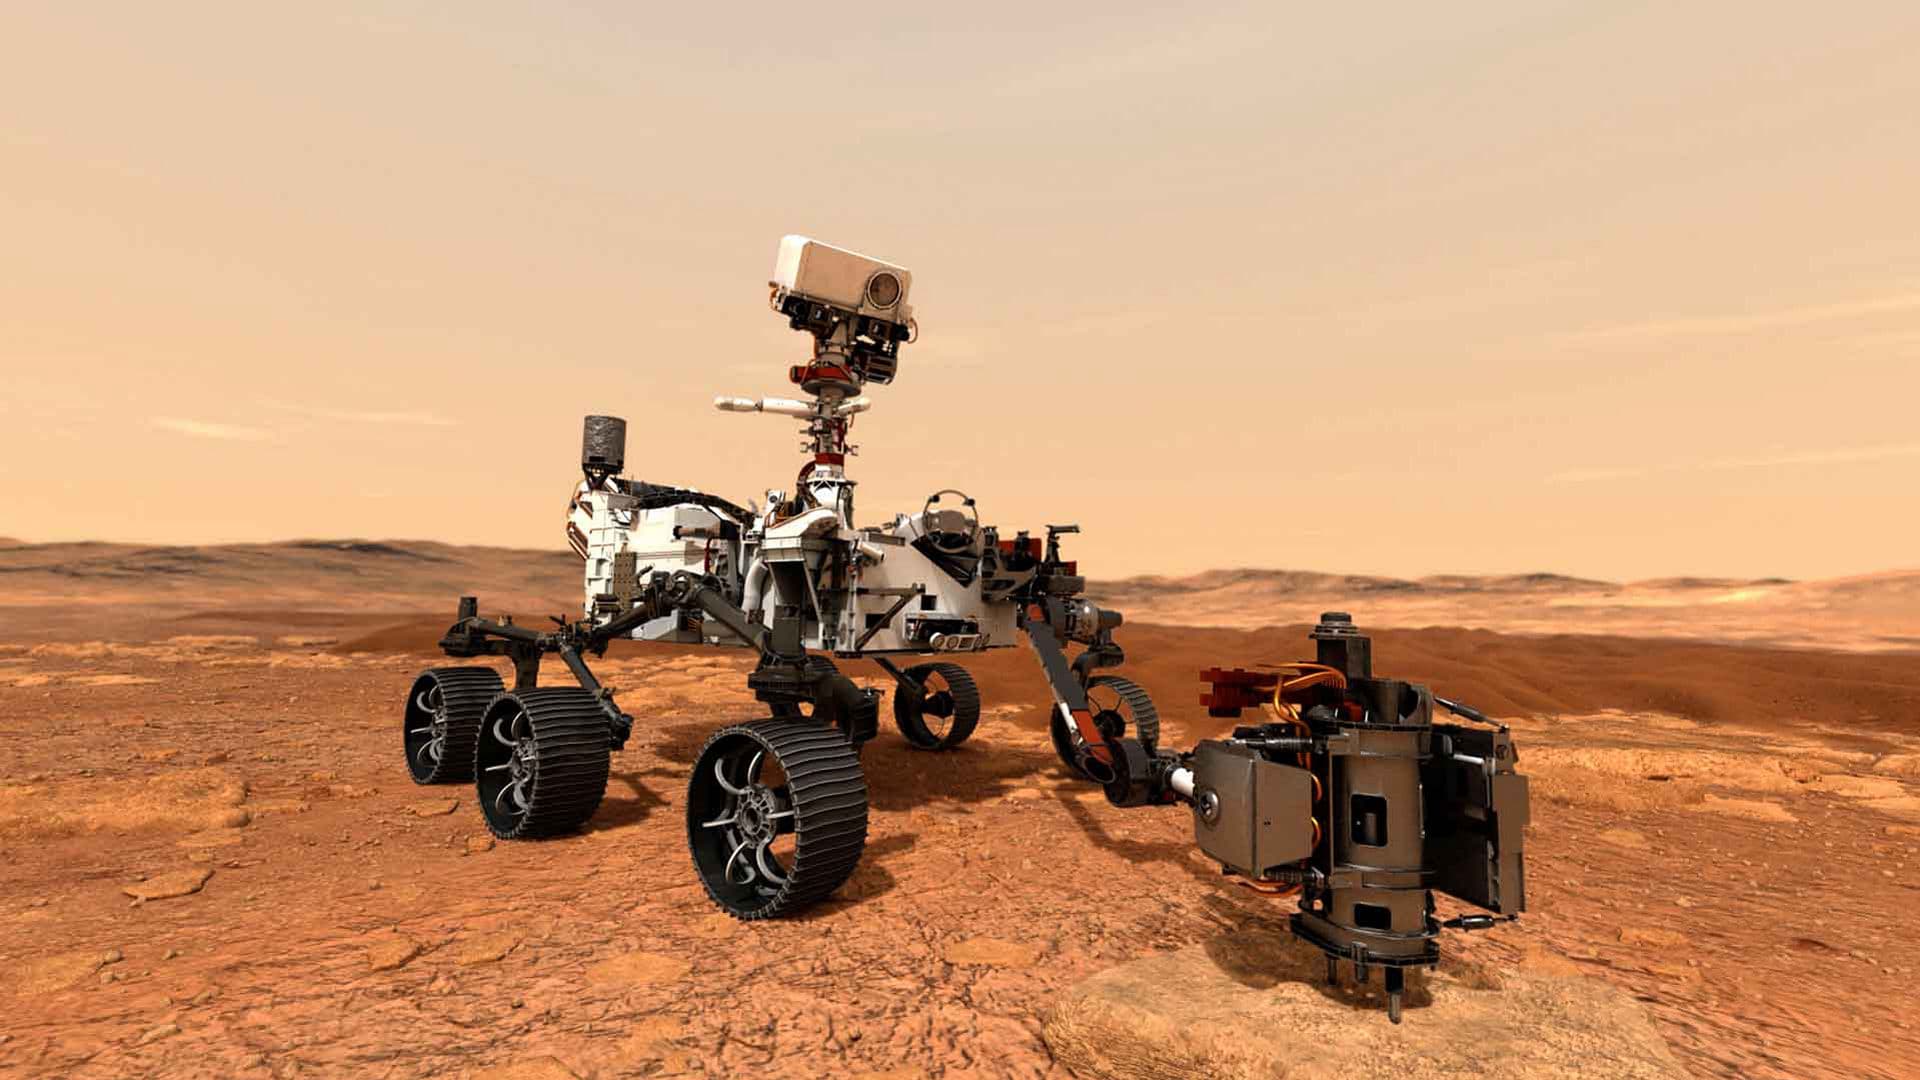 Rover Perseverance Is on Its Way to Mars